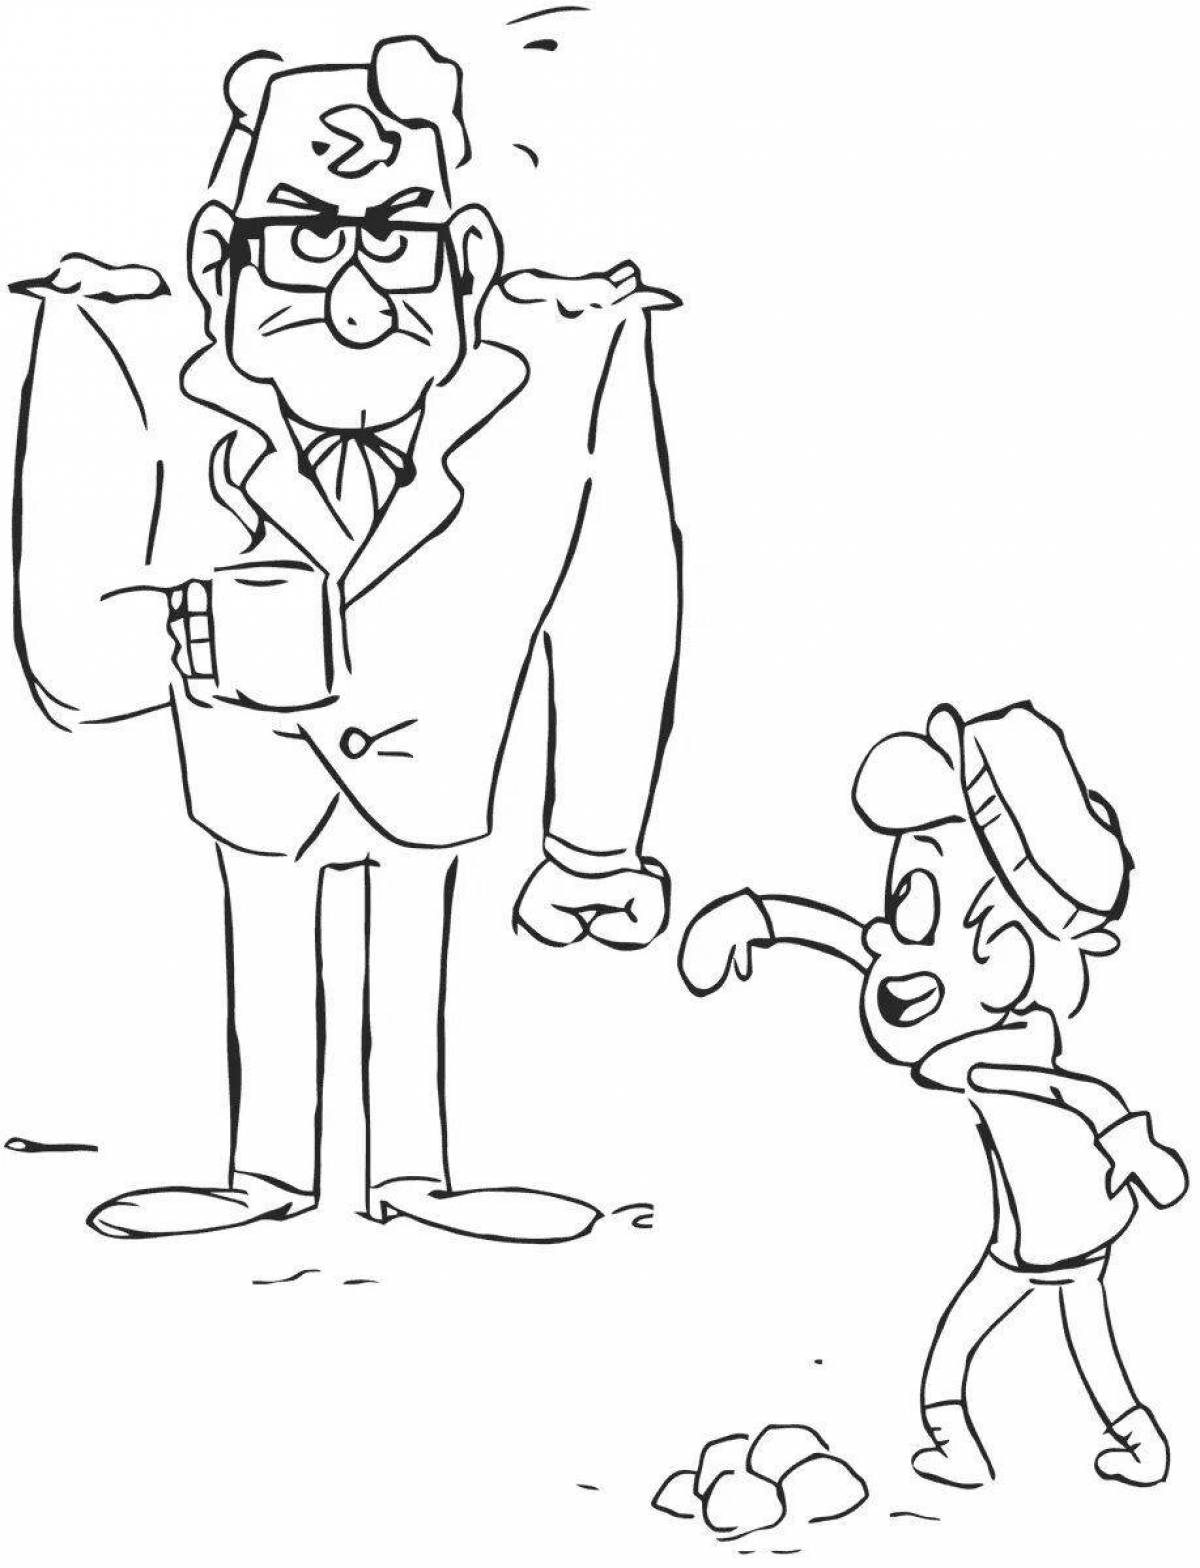 Gravity falls uncle stan's exciting coloring book